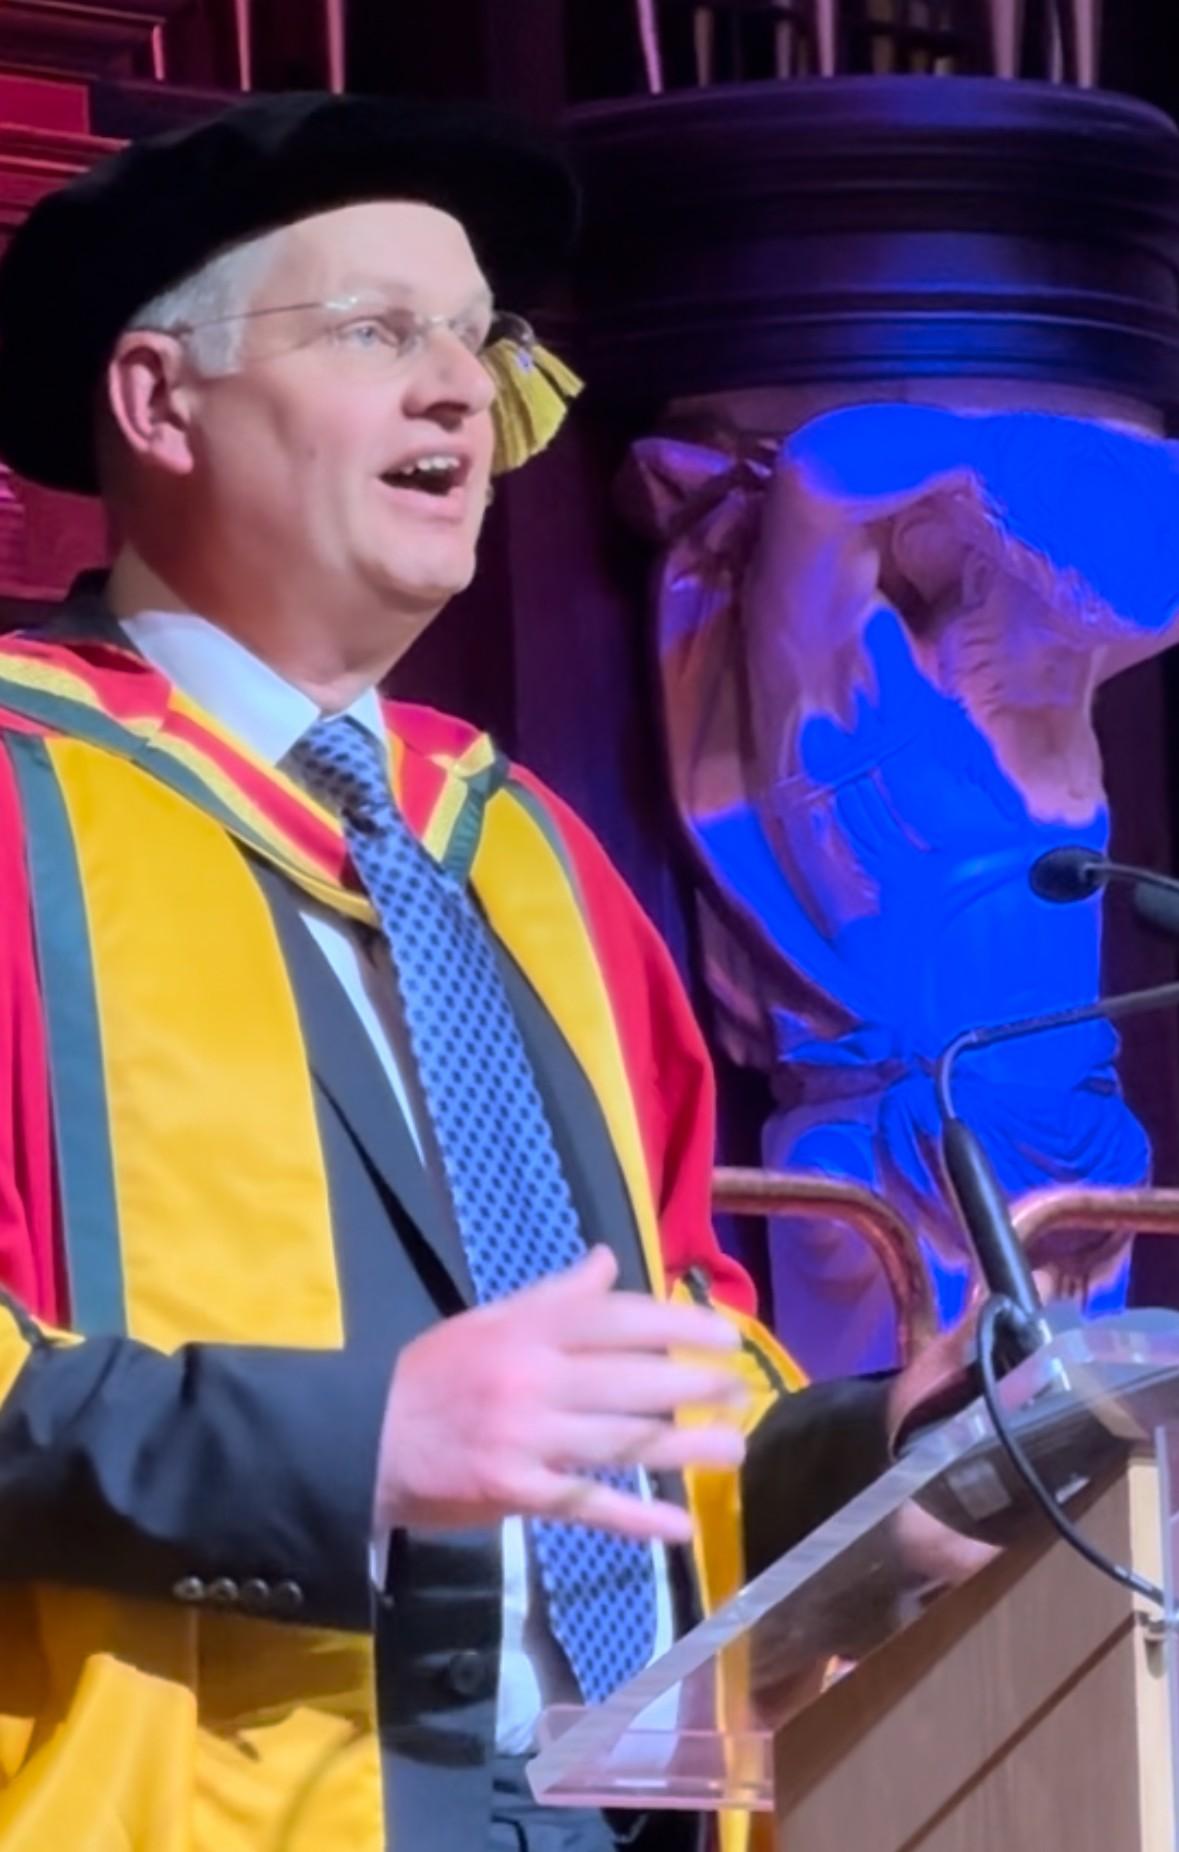 Head of Foundation Receives Honorary Doctorate